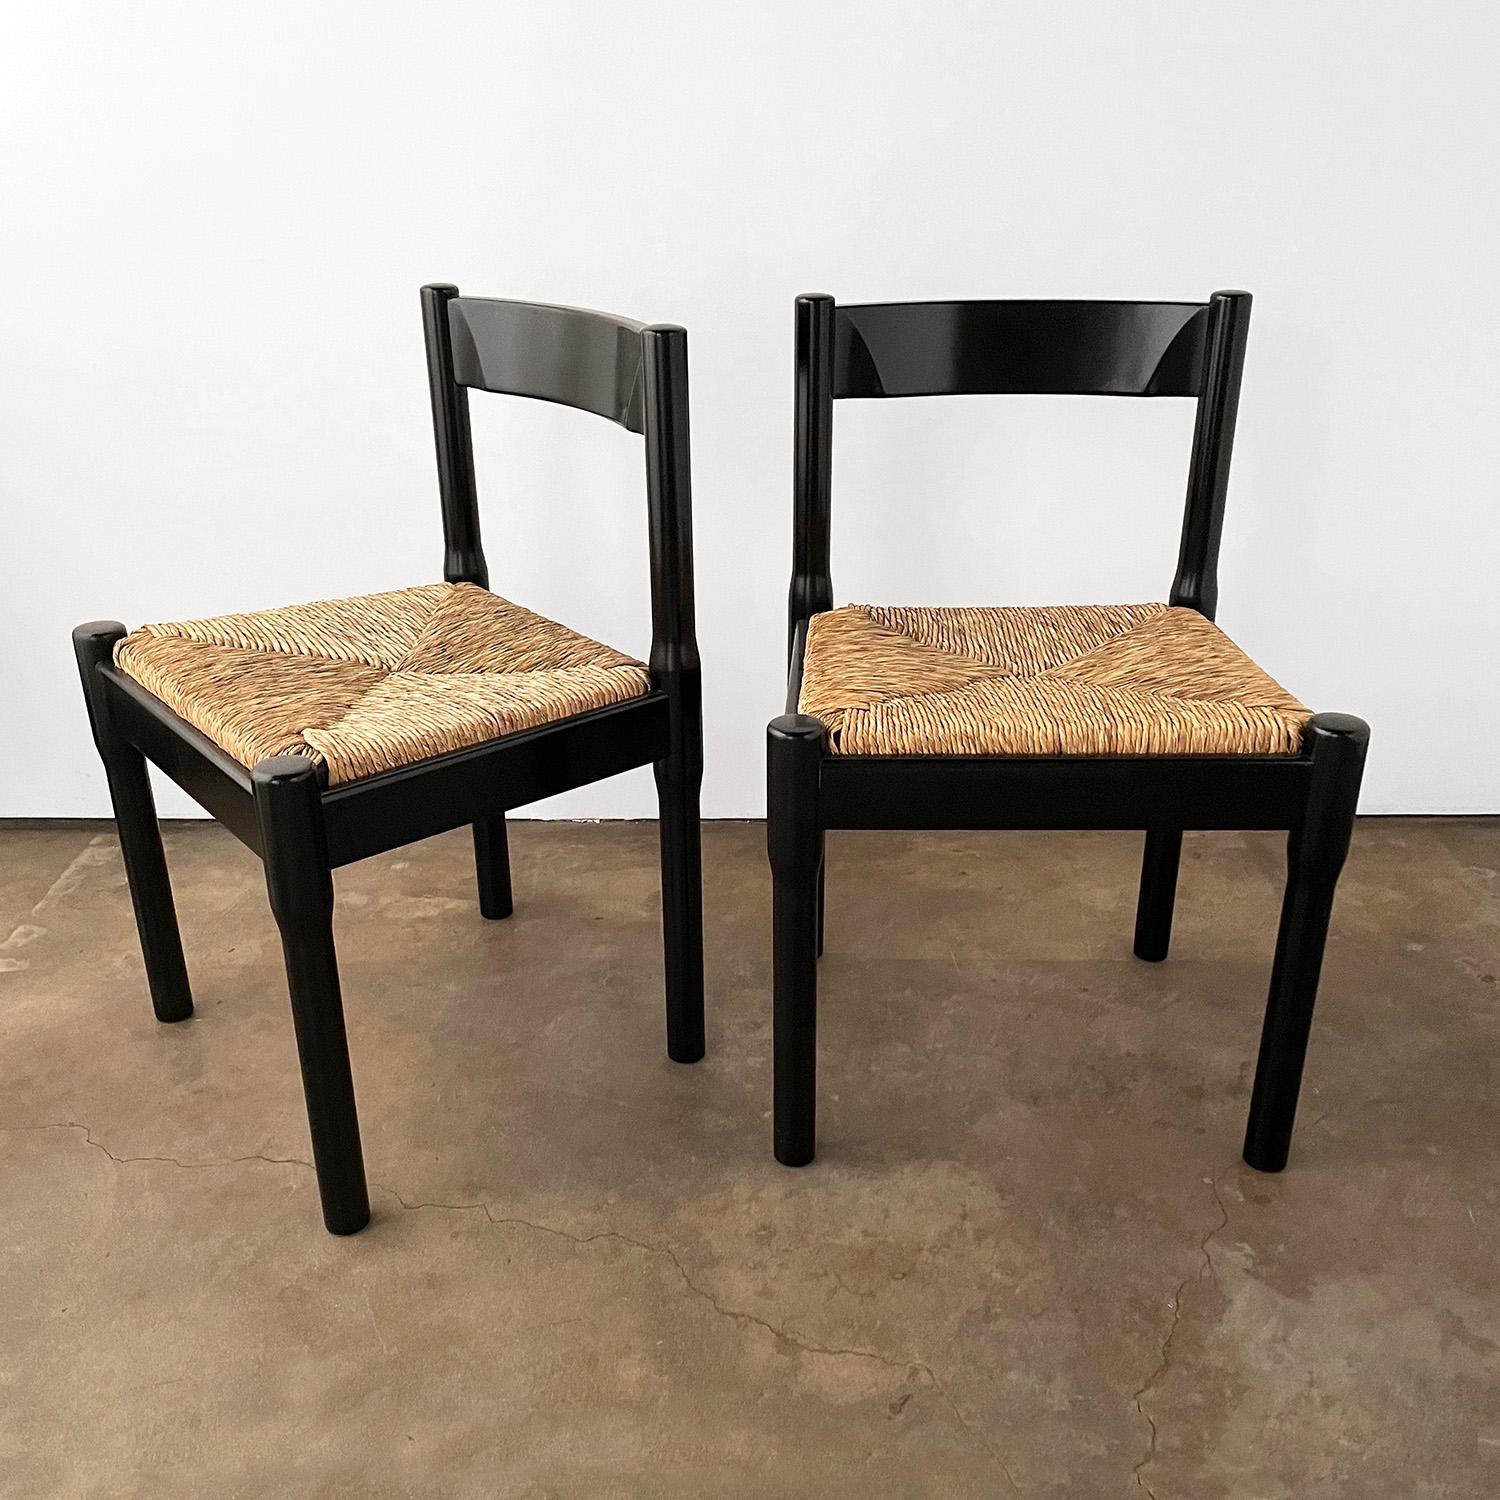 Vico Magistretti “Carimate” chairs
Produced by Cassina in the 1960’s
Black frames with natural woven seats
Timeless classic, modern design
Sold as a pair.